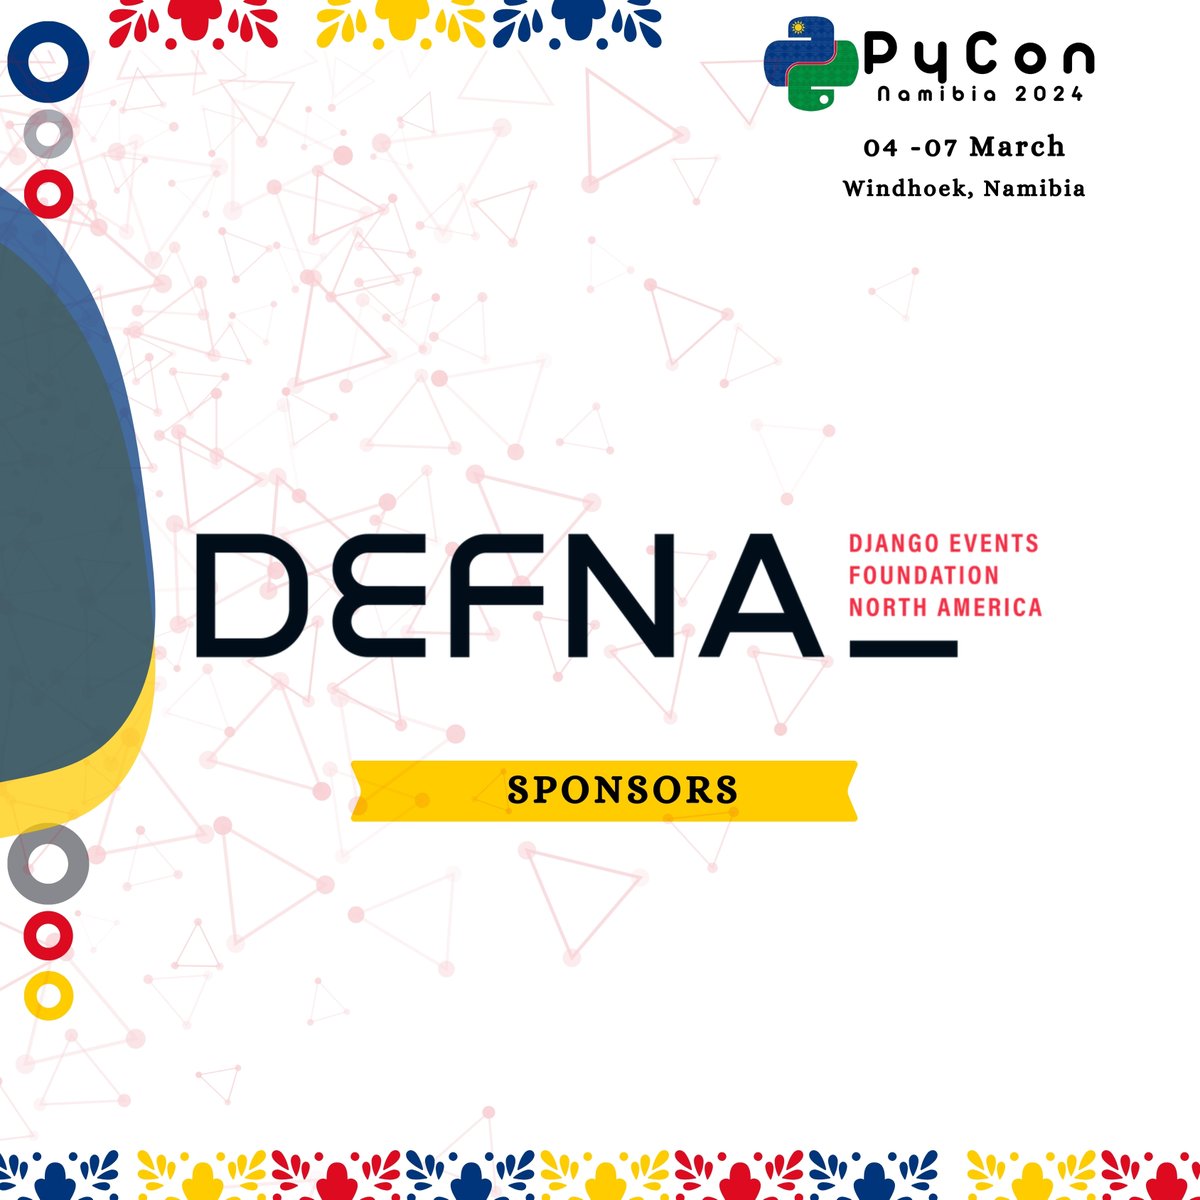 We are excited to announce that the Django Events Foundation North America has joined forces with us as a Sponsor for PyCon Namibia 2024! 🐍 Huge thanks to @defnado for their unwavering support. Dive in:defna.org to know about the foundation 🎉